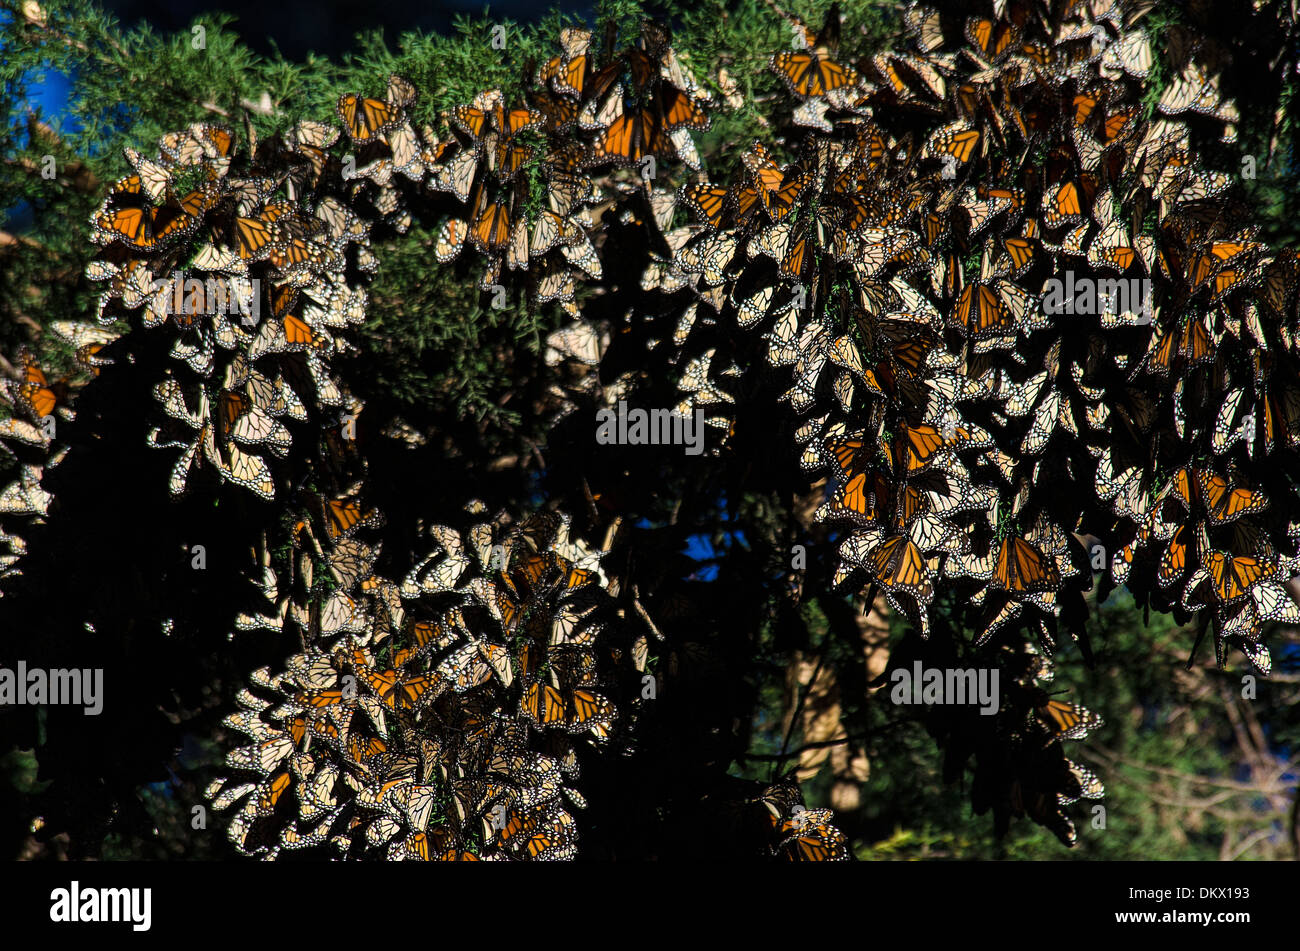 monarch, butterfly, insect, wintering area, Pismo beach, USA, United States, America, California, Stock Photo